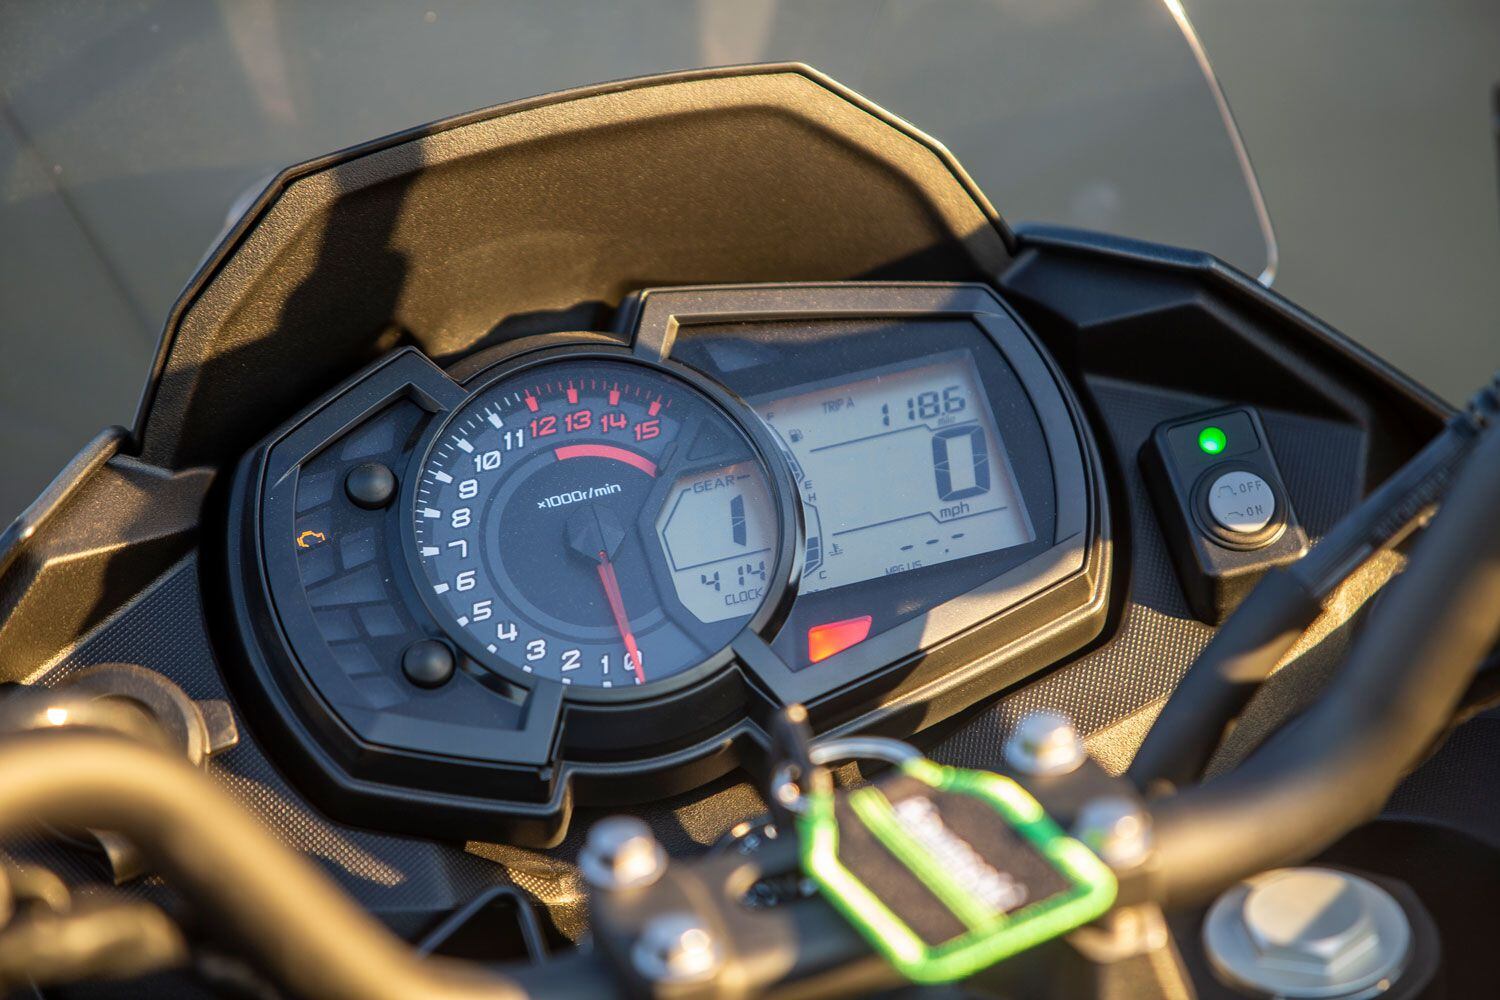 Nothing overly complicated about this gauge. The accessory LED auxiliary light set ($409.95) can be powered on with a simple click of the button on the right.